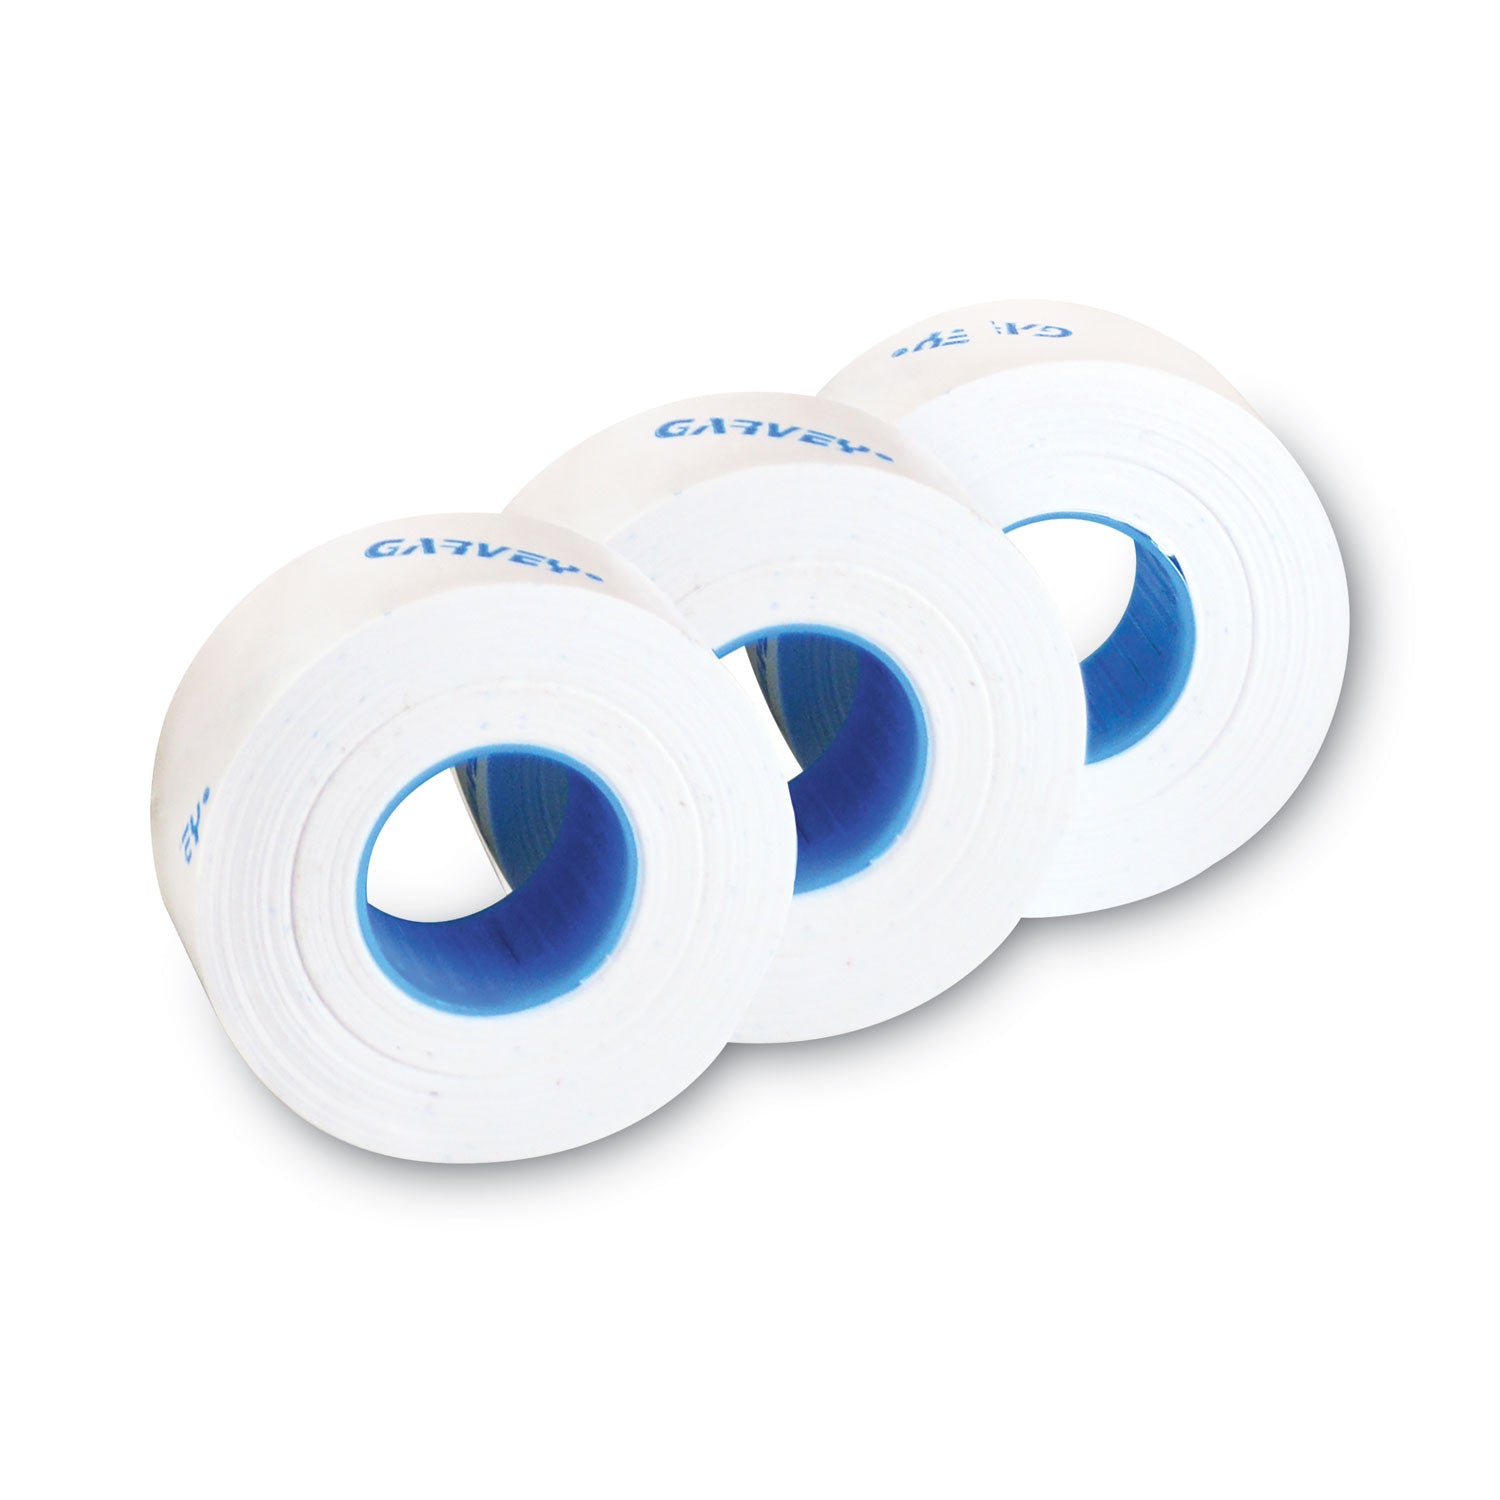 One-Line Pricemarker Labels, 0.44 x 0.81, White, 1,200/Roll, 3 Rolls/Box - 